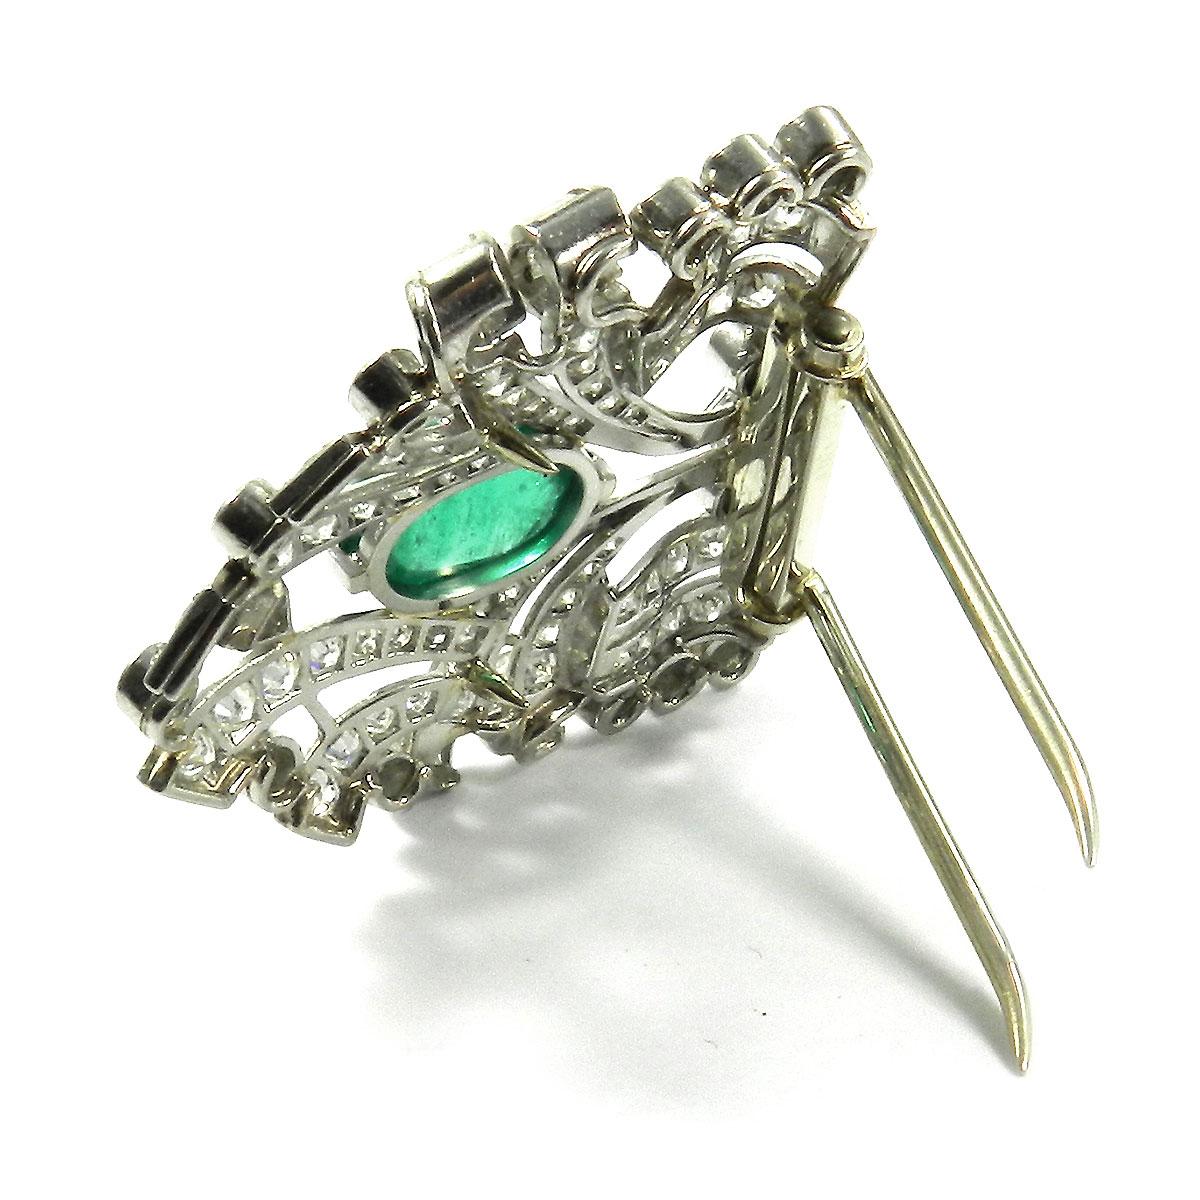 Contemporary 4.4 Carat Emerald and Diamond Clip Brooch in Platinum and 18 Karat White Gold